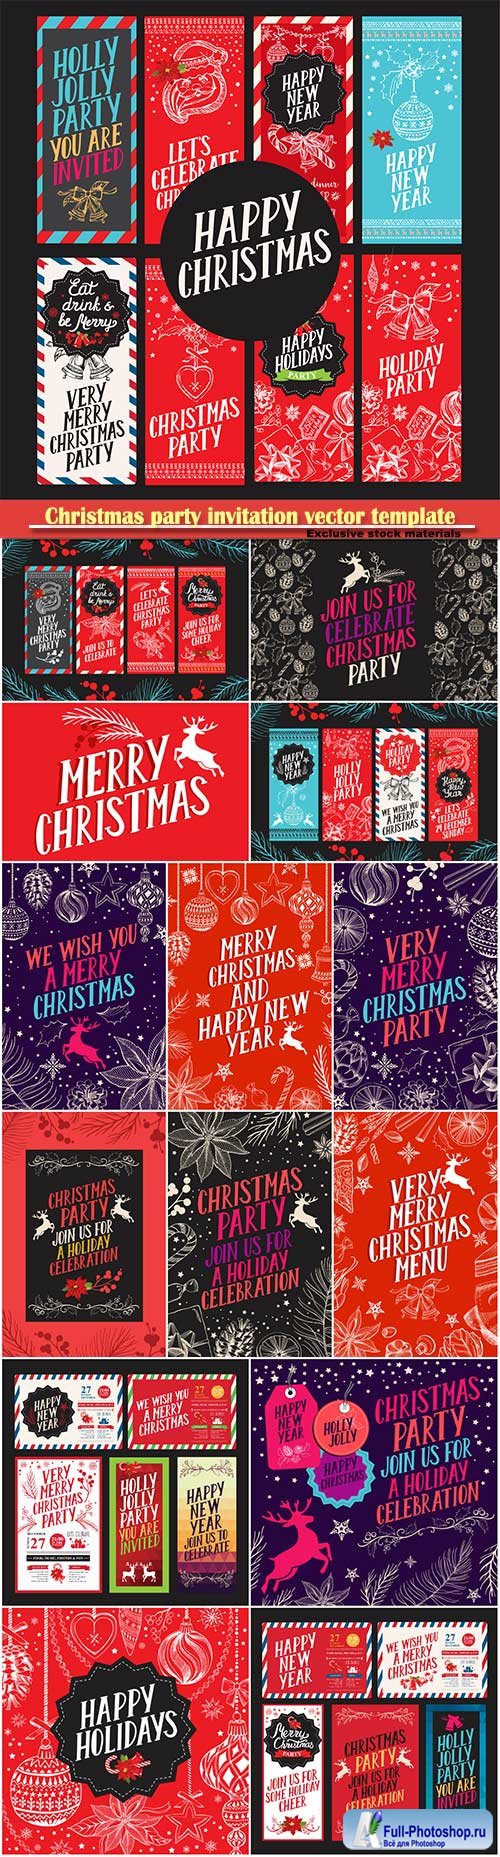 Christmas party invitation vector template